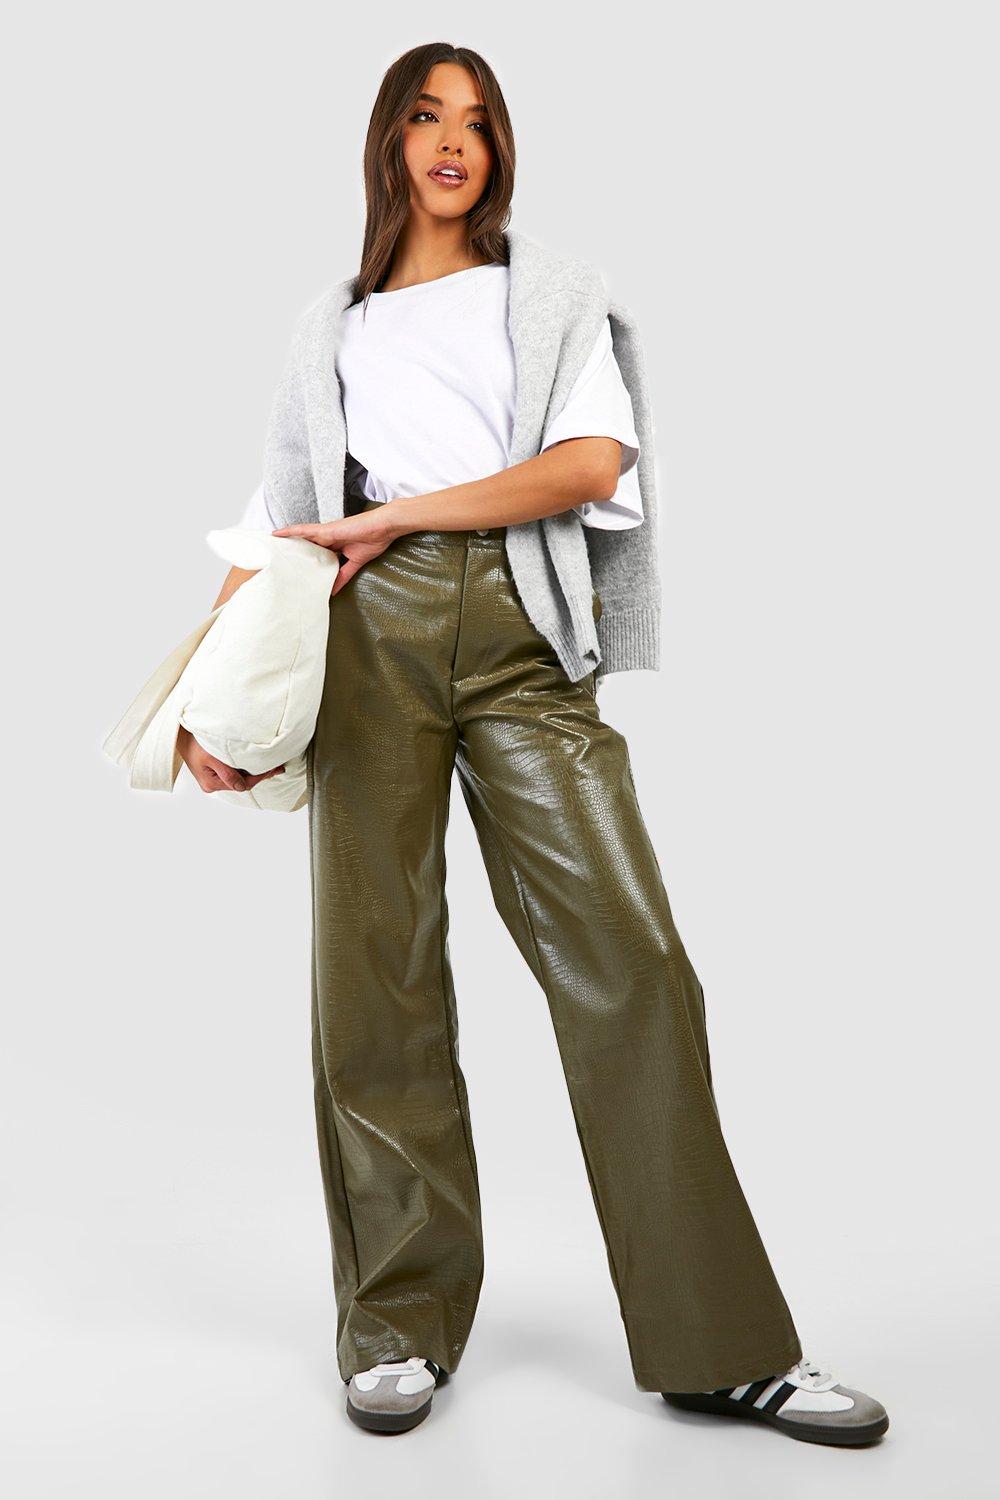 Zara Faux Leather Trousers  Leather trousers, Clothes design, Zara